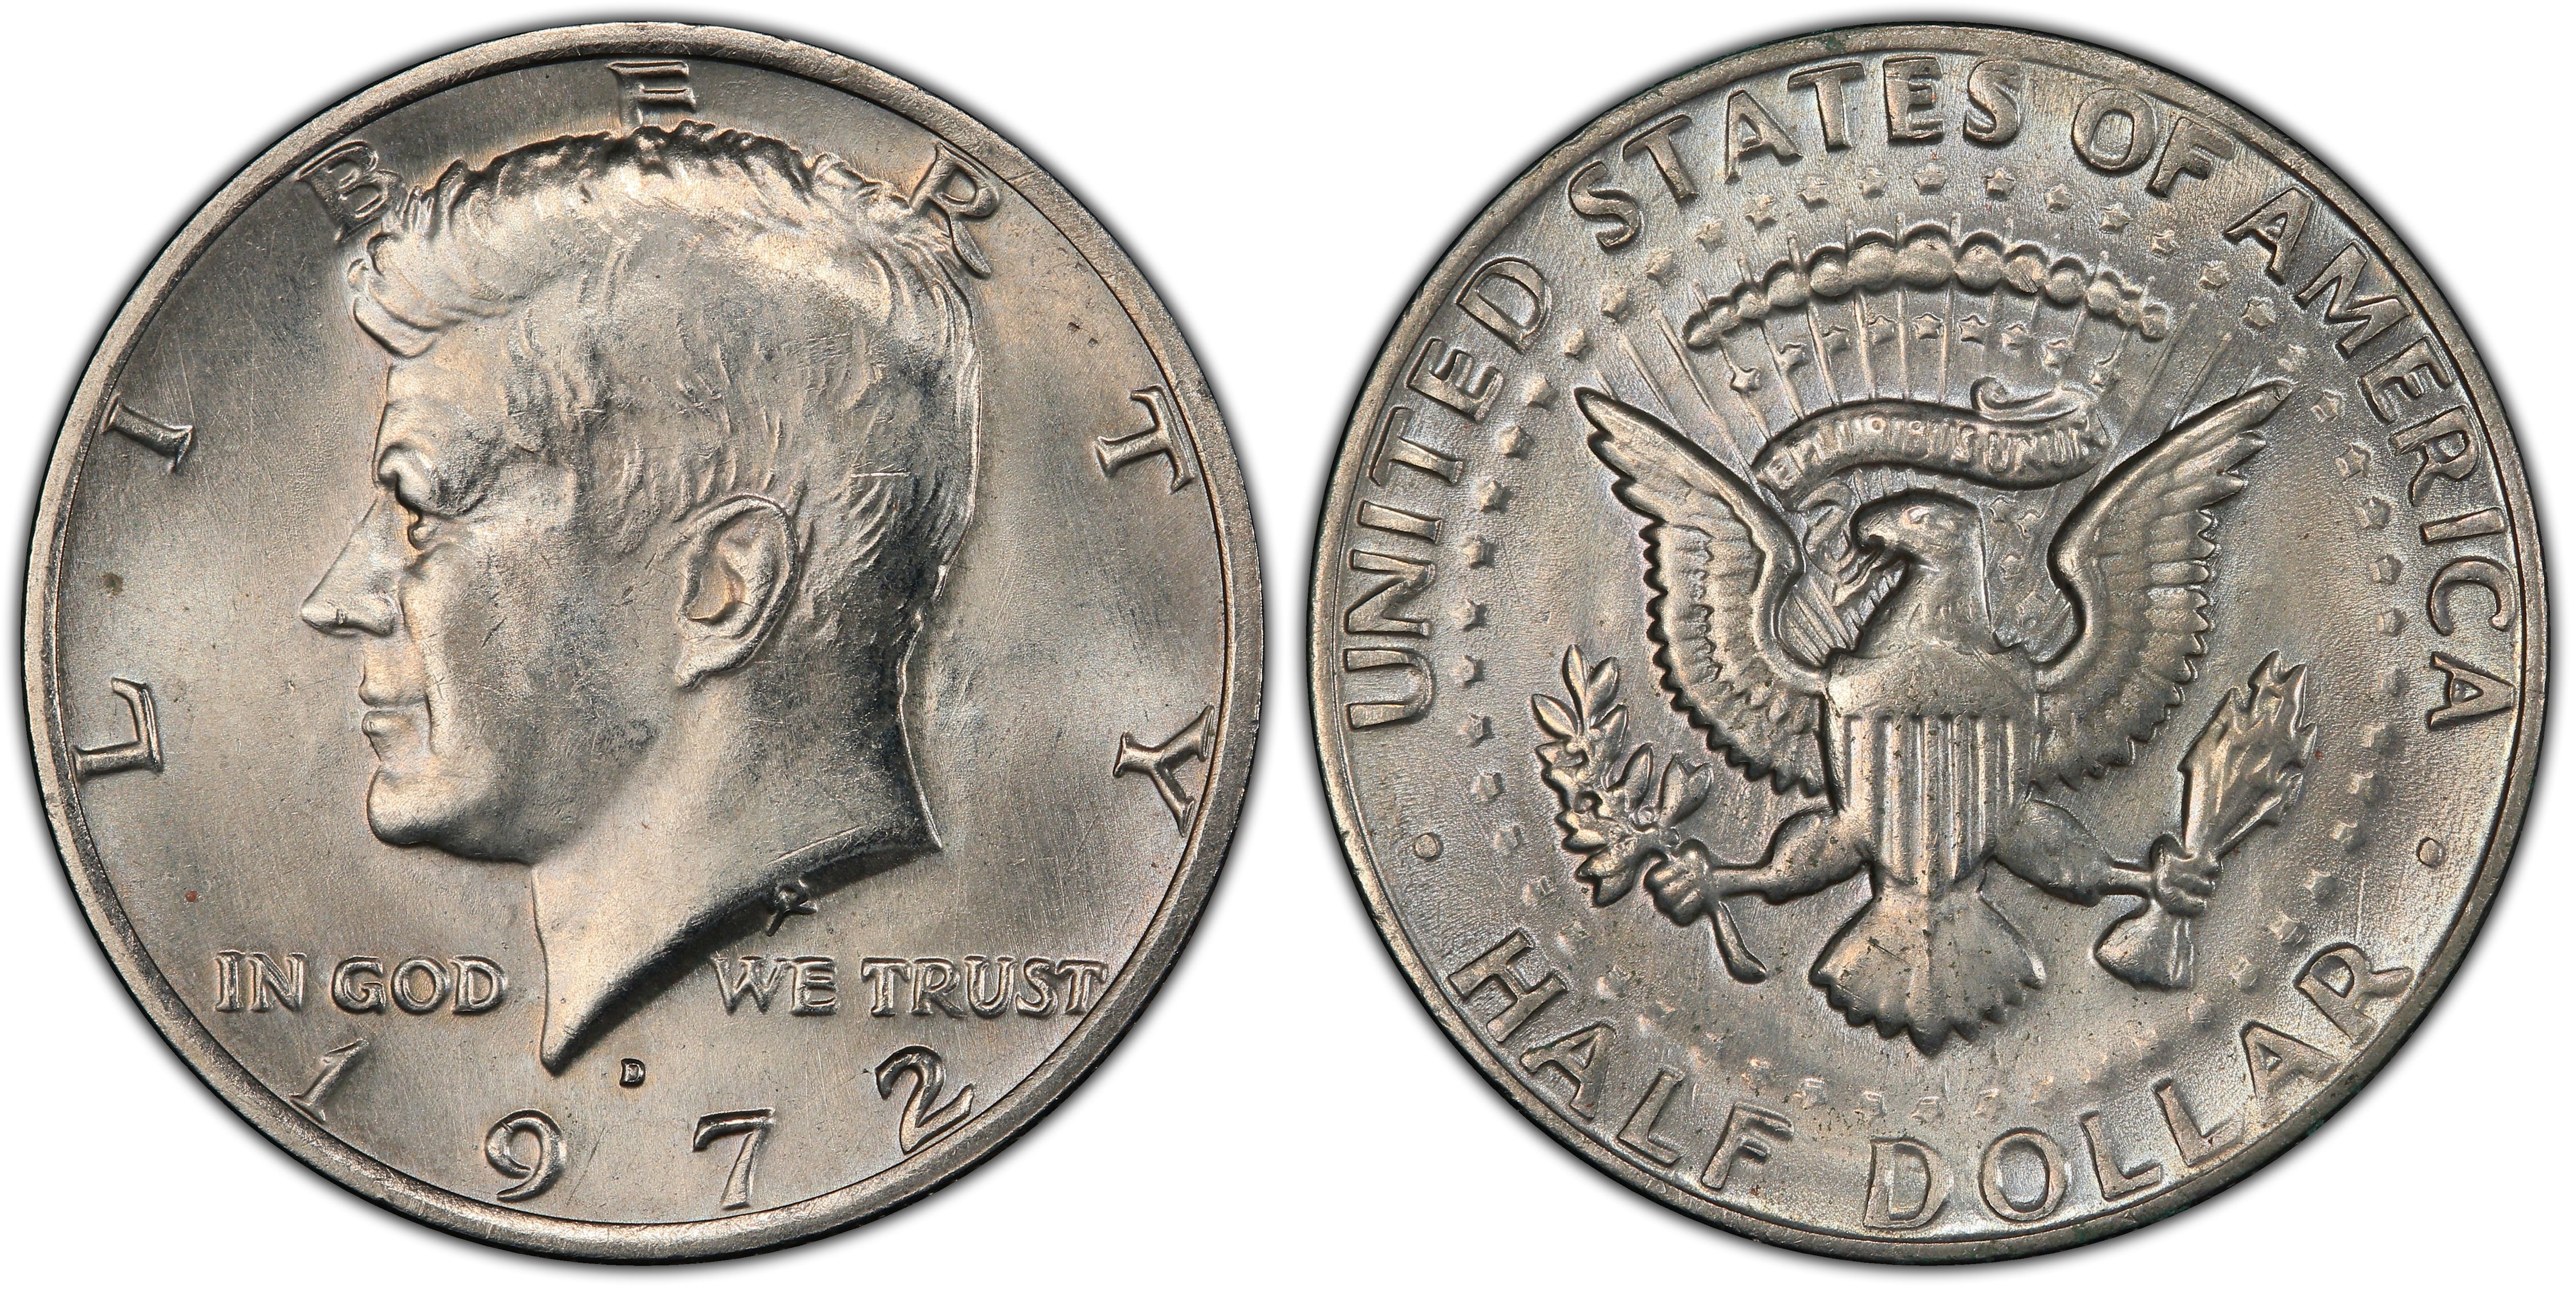 1972 D 50c No Fg Fs 901 Regular Strike Kennedy Half Dollar Pcgs Coinfacts,What Is Viscose Rayon